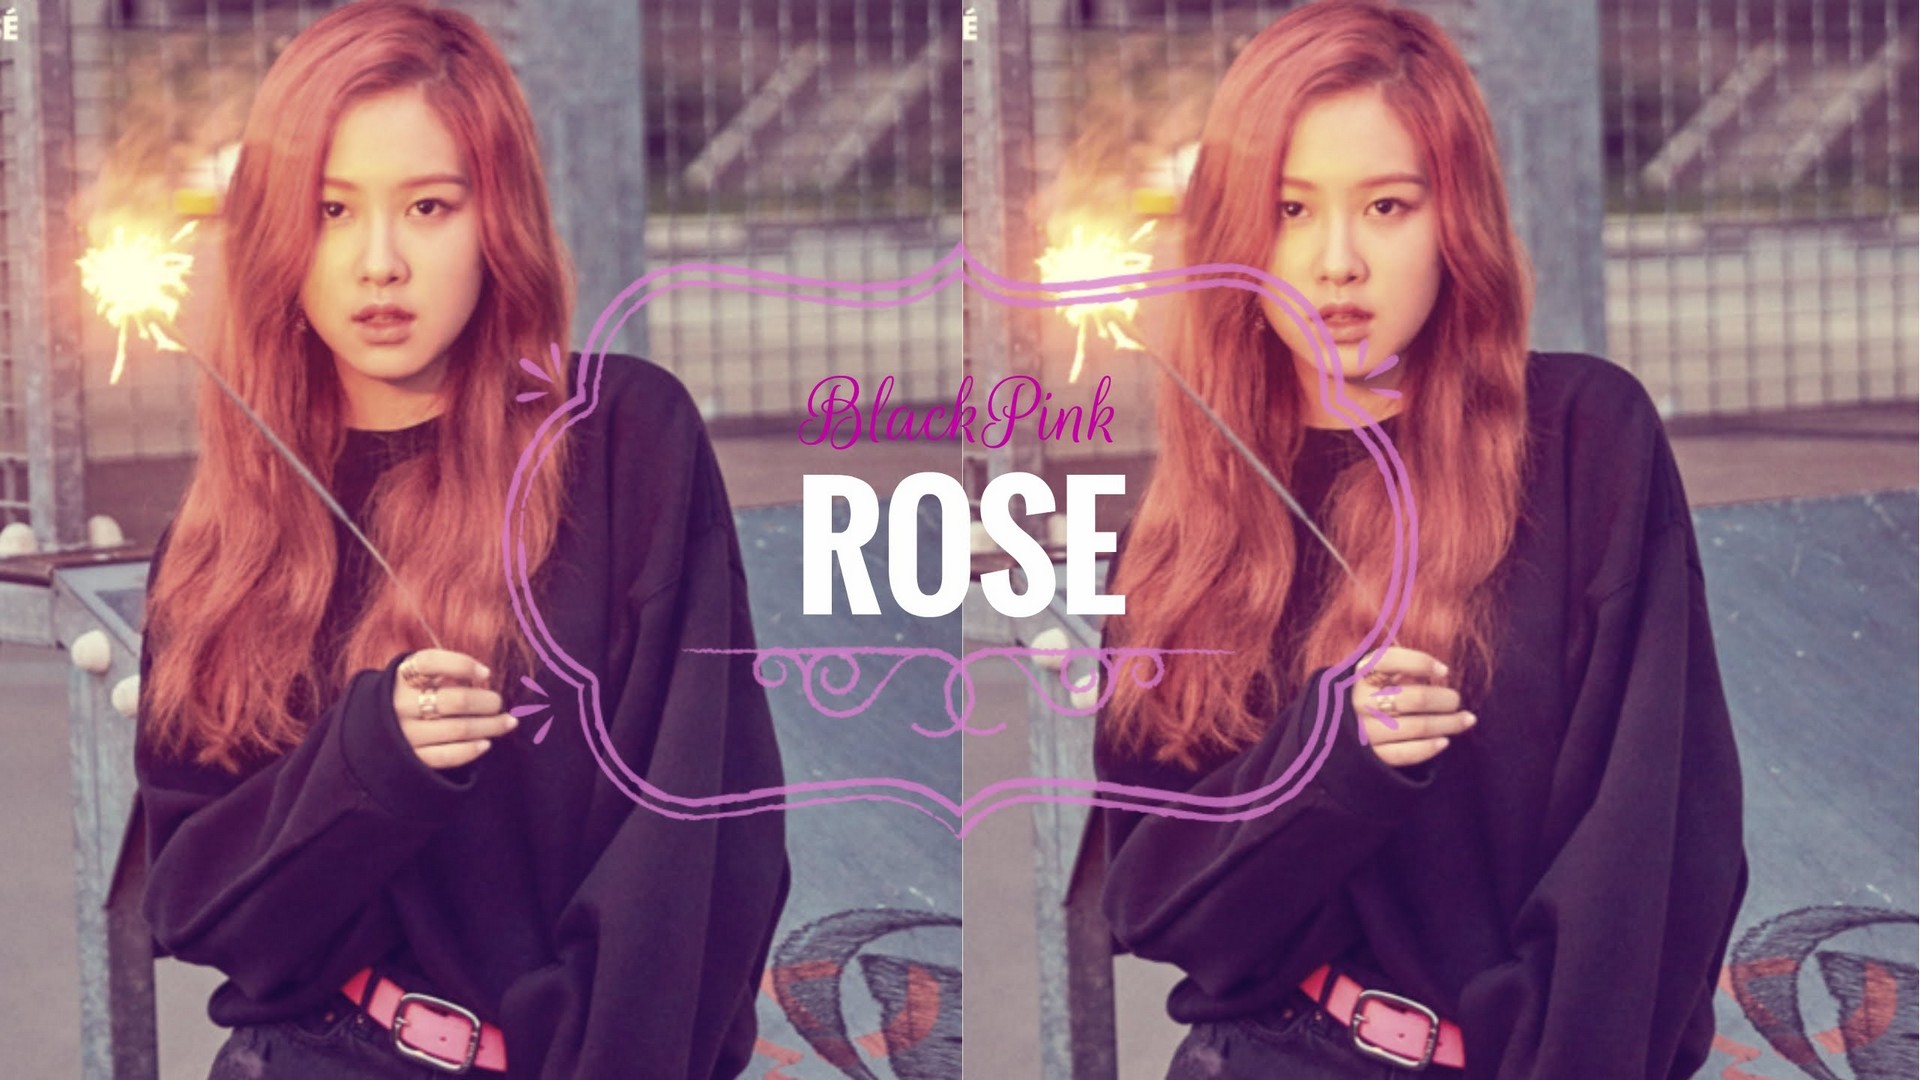 Rosé Blackpink Wallpaper HD With high-resolution 1920X1080 pixel. You can use this wallpaper for your Windows and Mac OS computers as well as your Android and iPhone smartphones